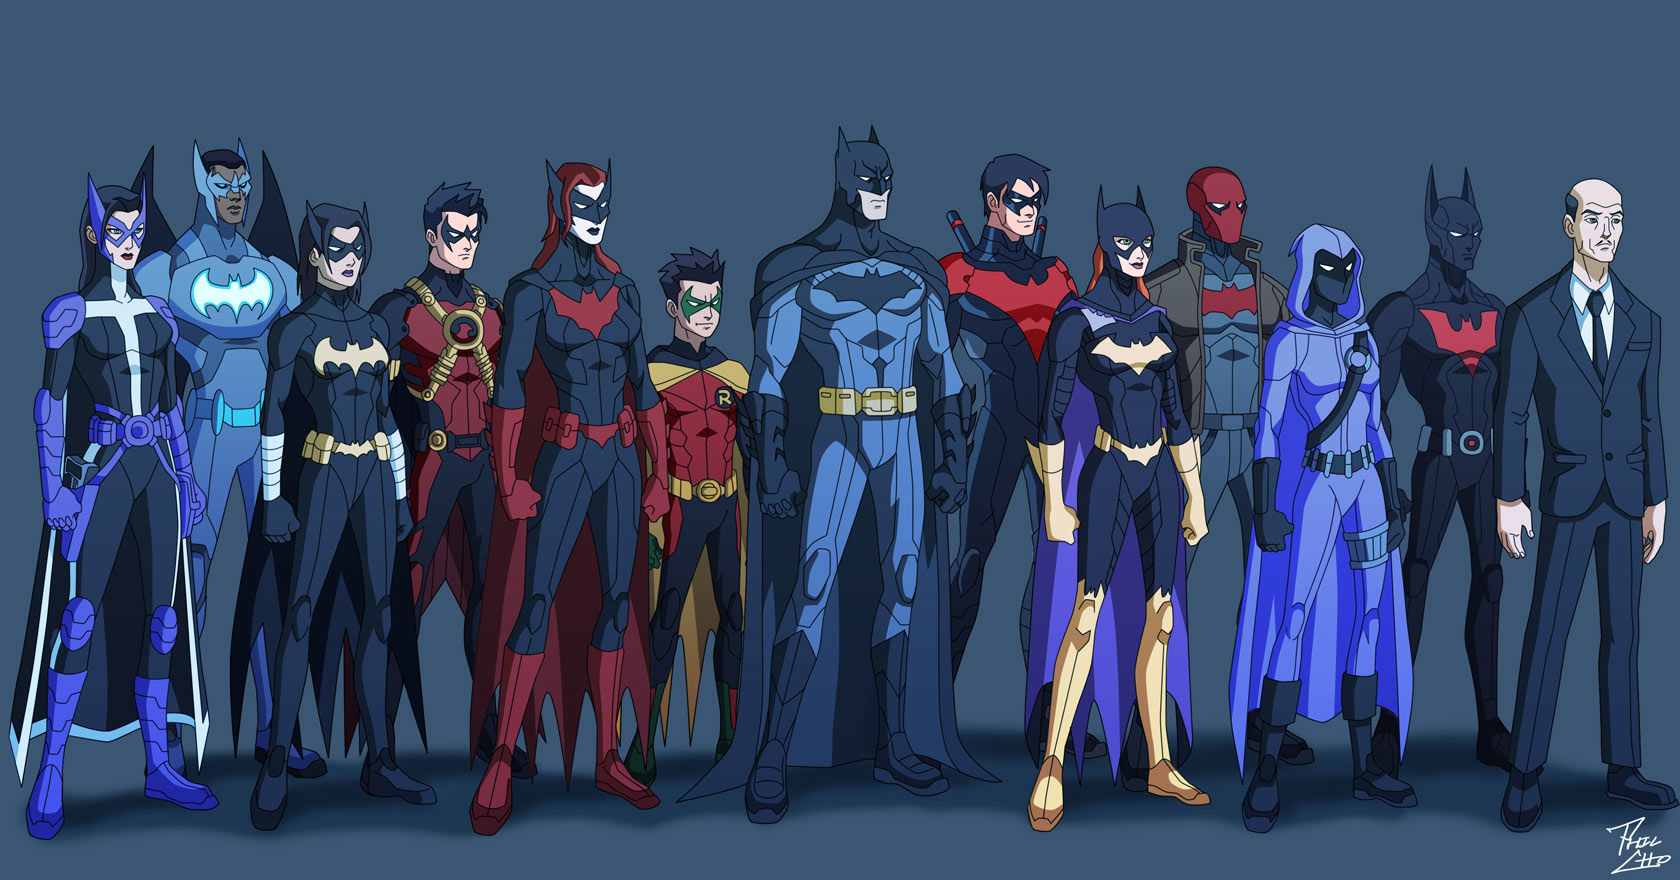 Batman Bat Family Wallpaper 89 images in Collection Page 2